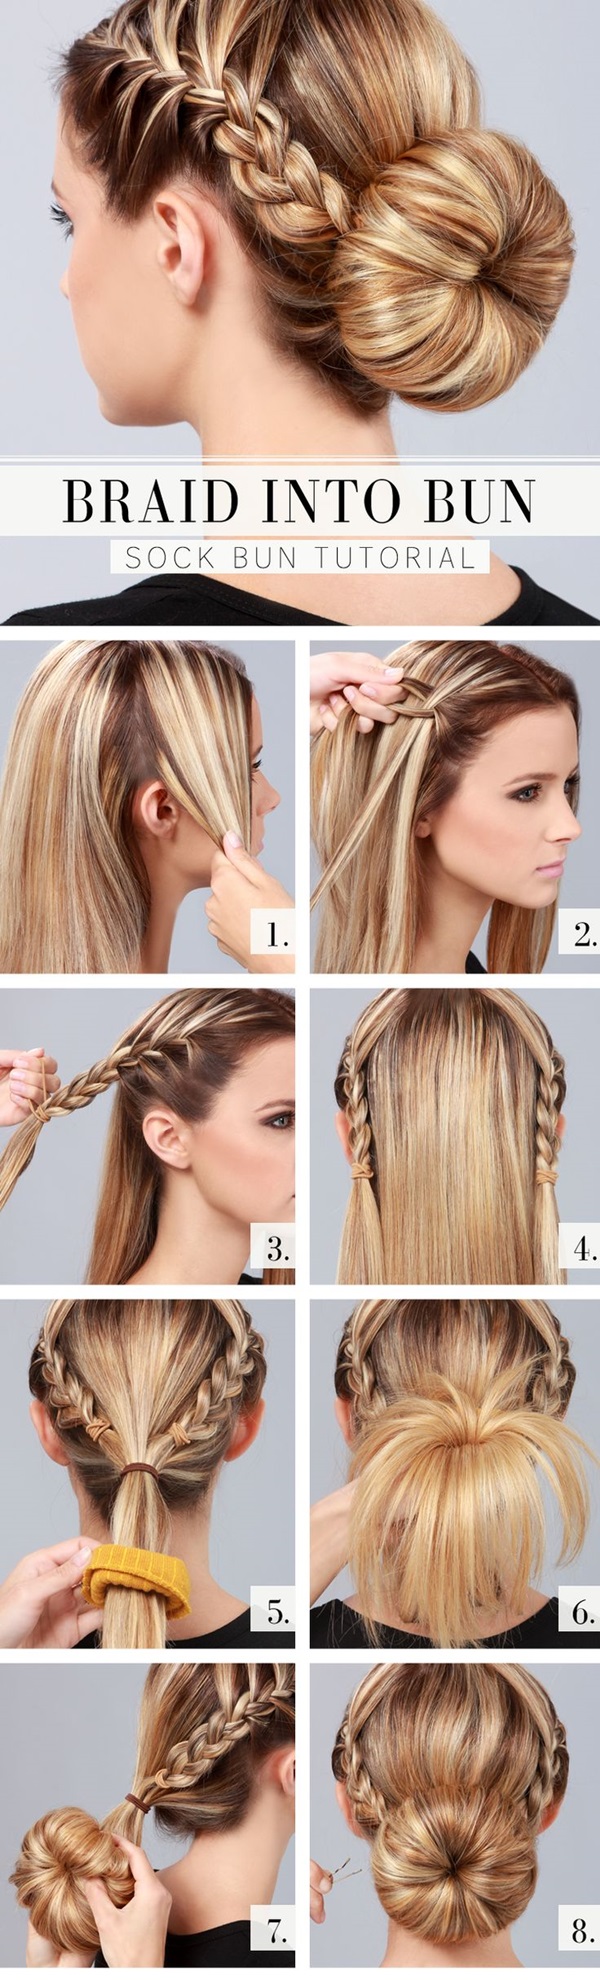 Simple Five Minute Hairstyles (45)